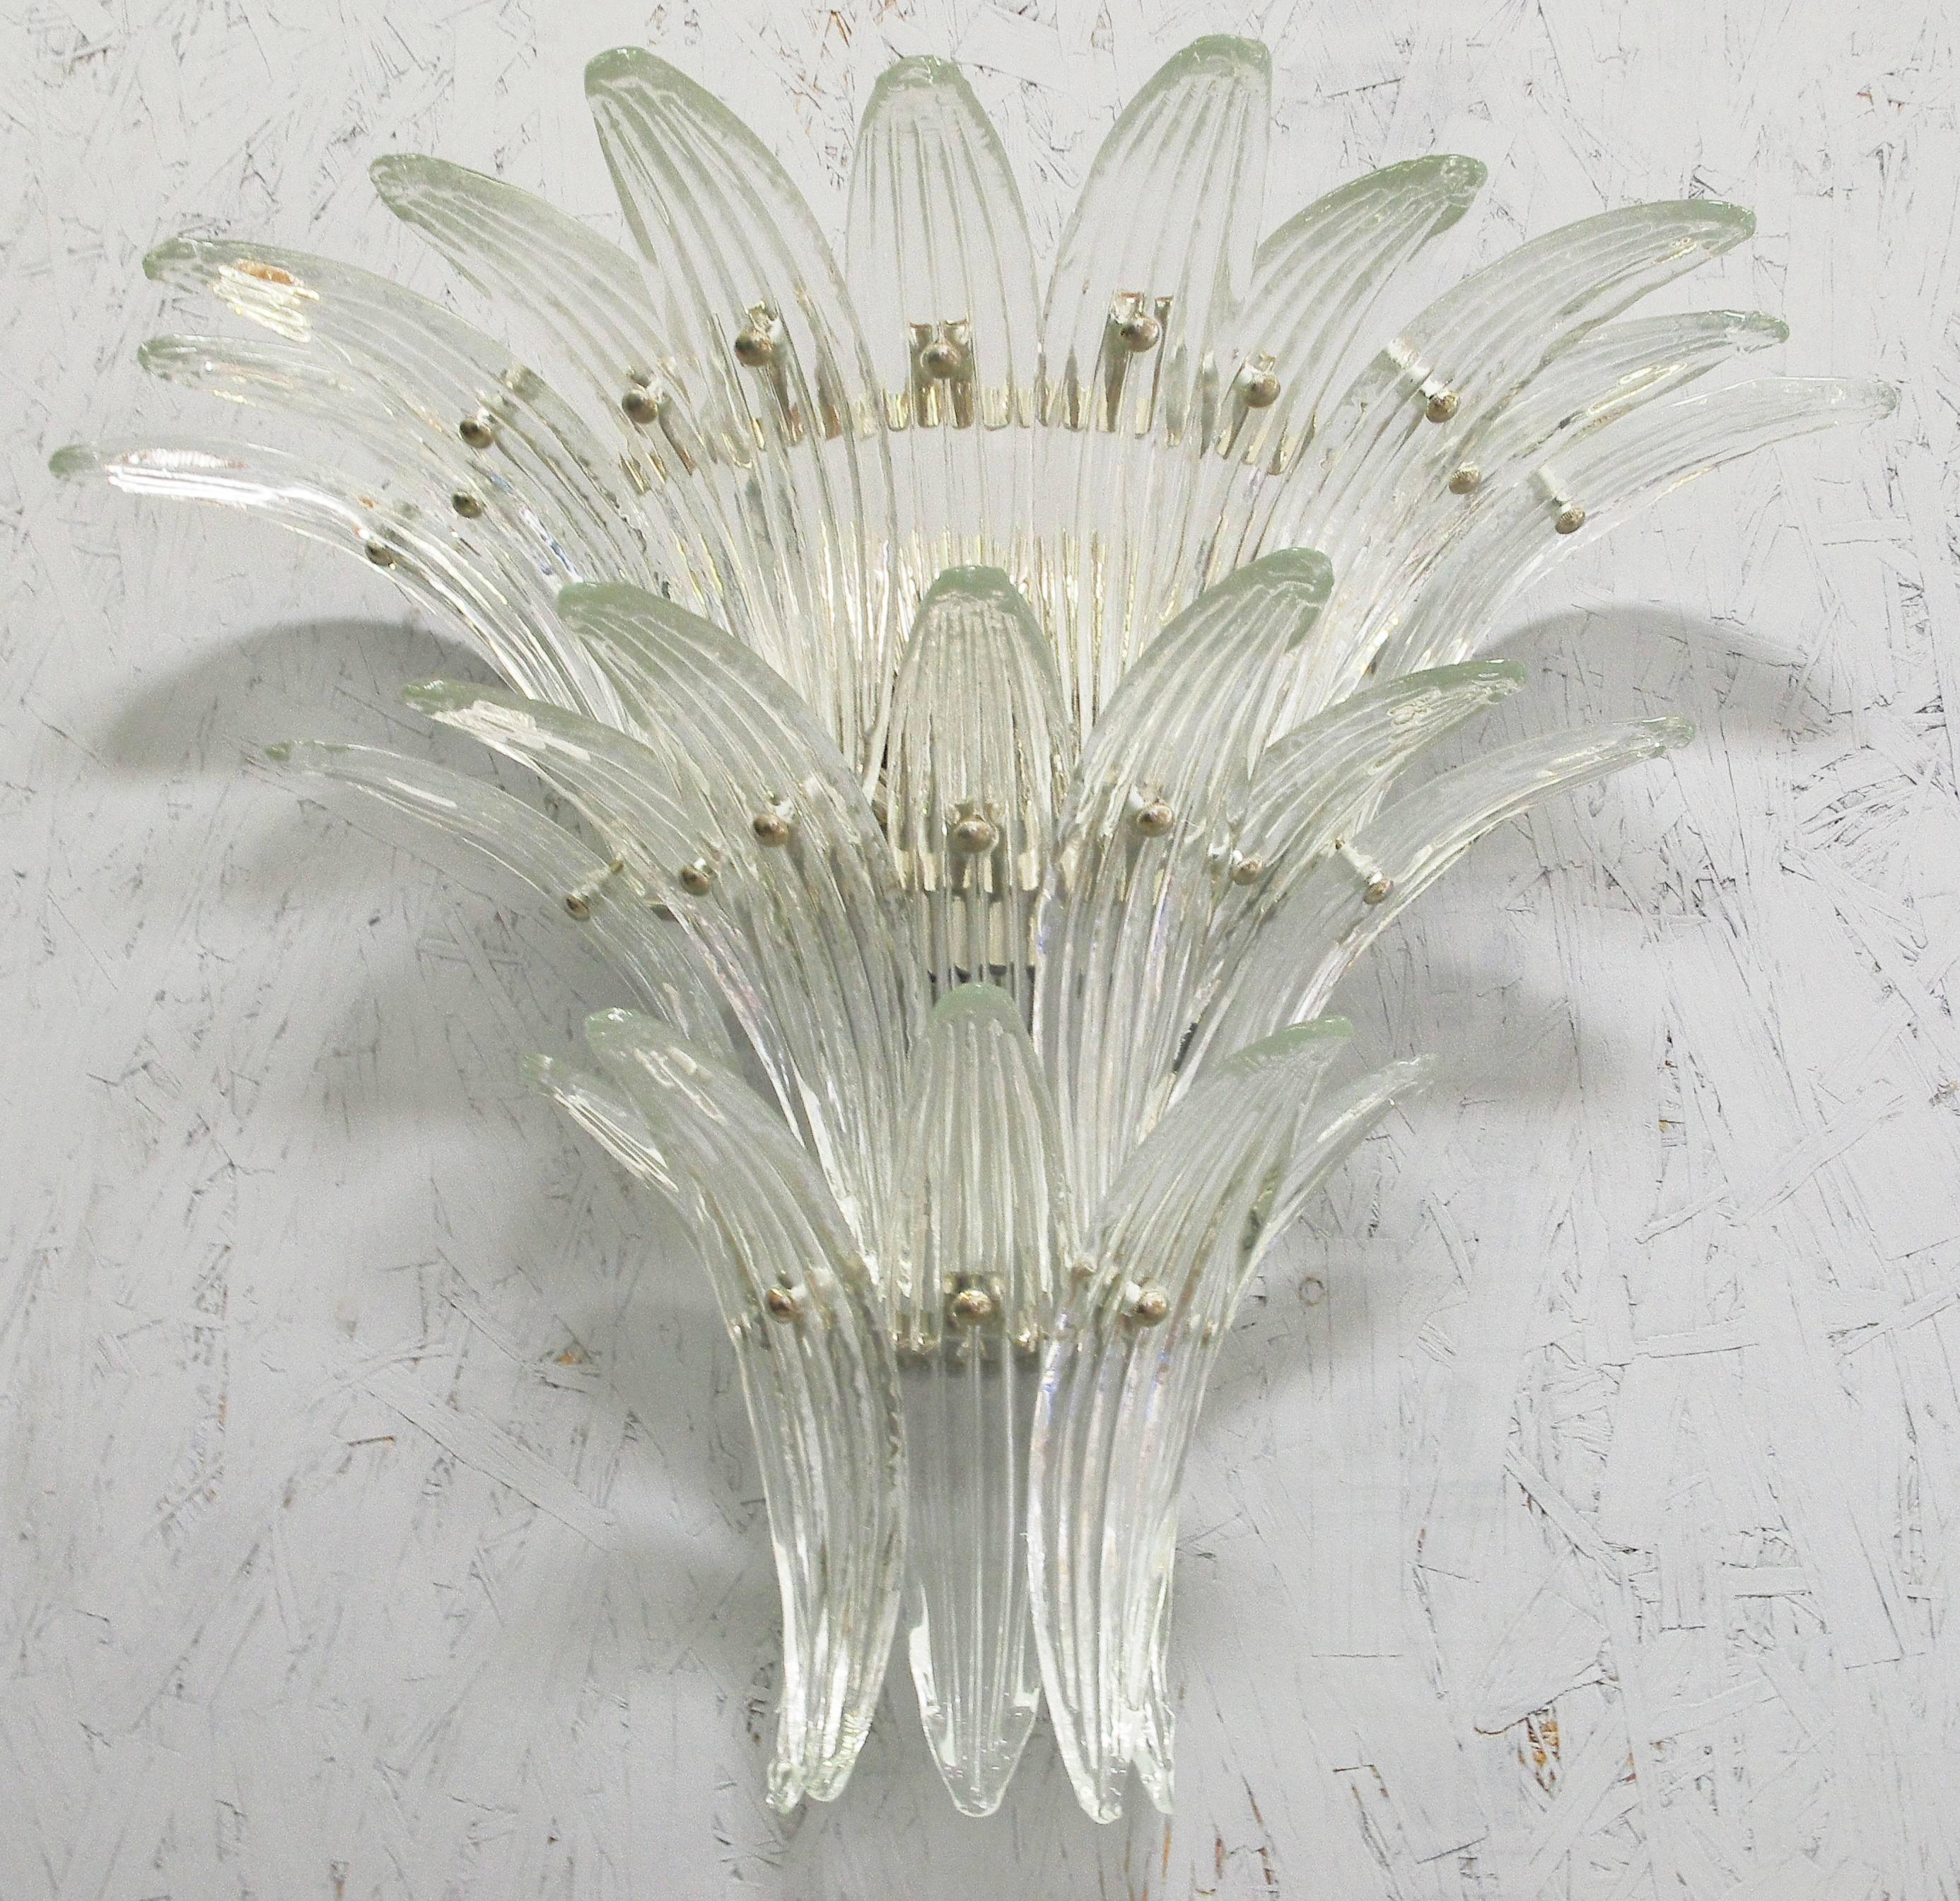 Italian Palmette wall light with 23 clear Murano glass leaves mounted on chrome finish metal frame by Fabio Ltd / Made in Italy
3 lights / E12 or E14 type / max 40W each
Height: 20 inches / Width: 27 inches / Depth: 10 inches 
Please inquire for